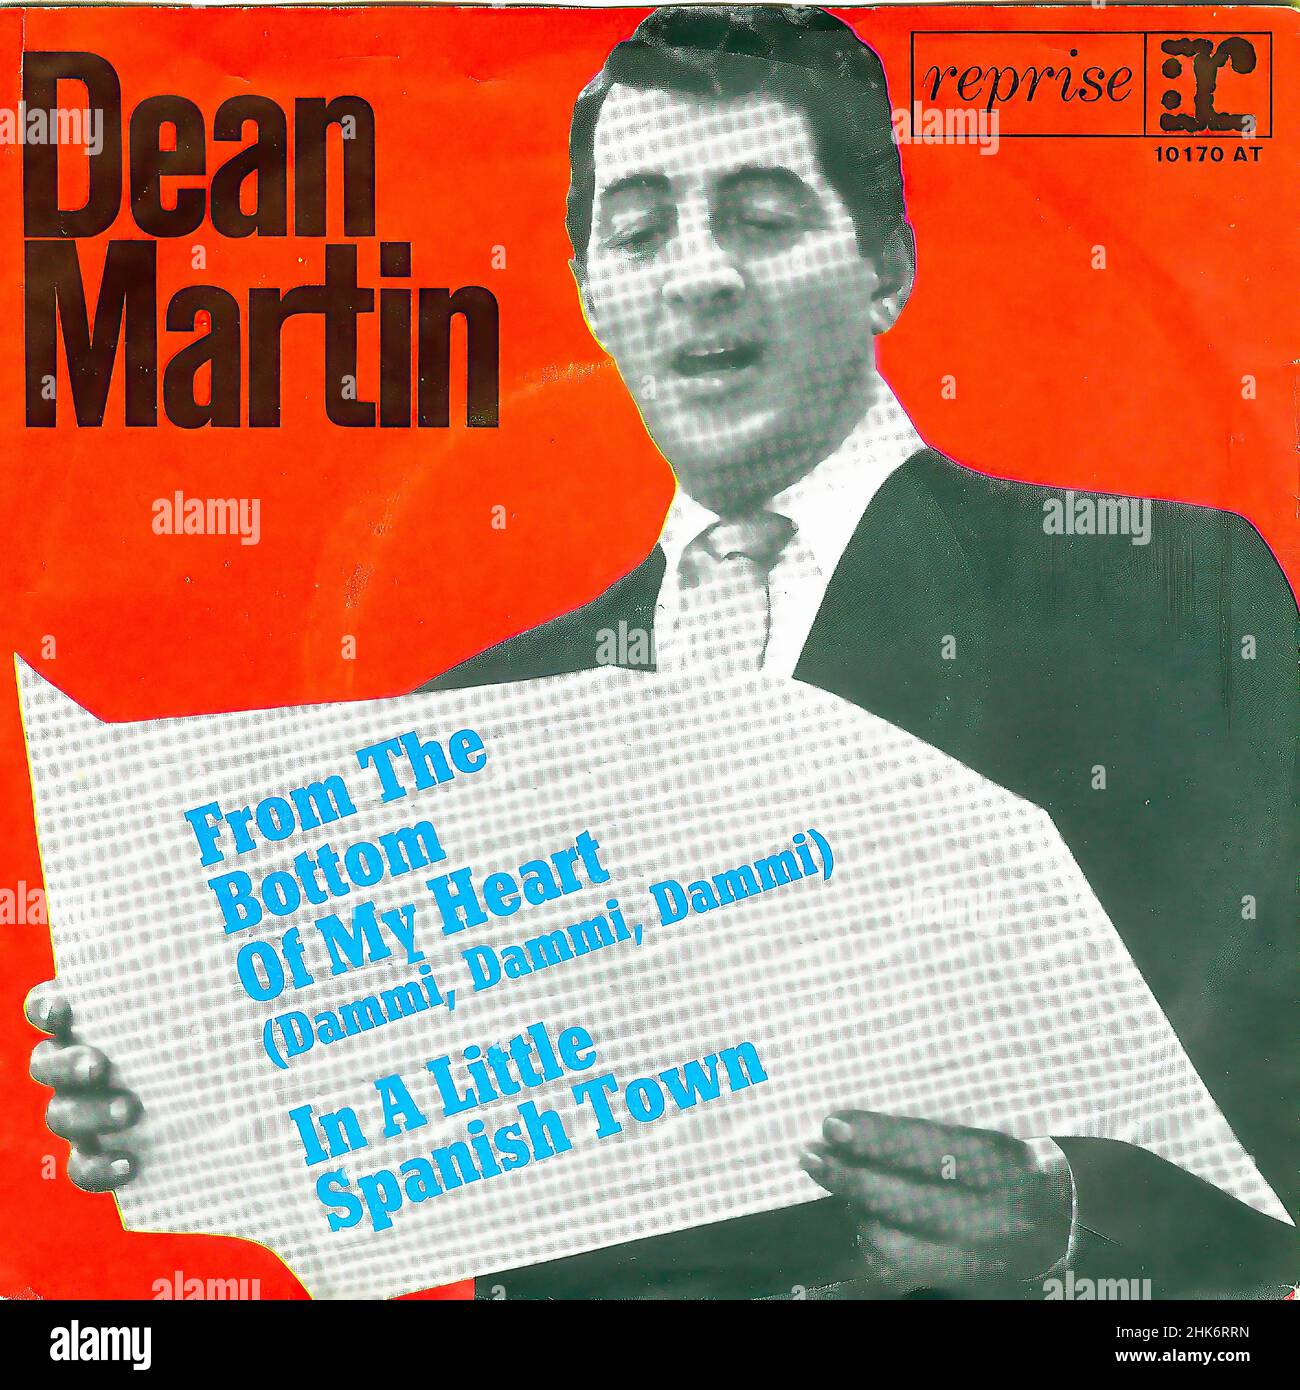 Vintage vinyl record cover - Martin, Dean - From The Bottom Of My Heart - D - 1962 Stock Photo